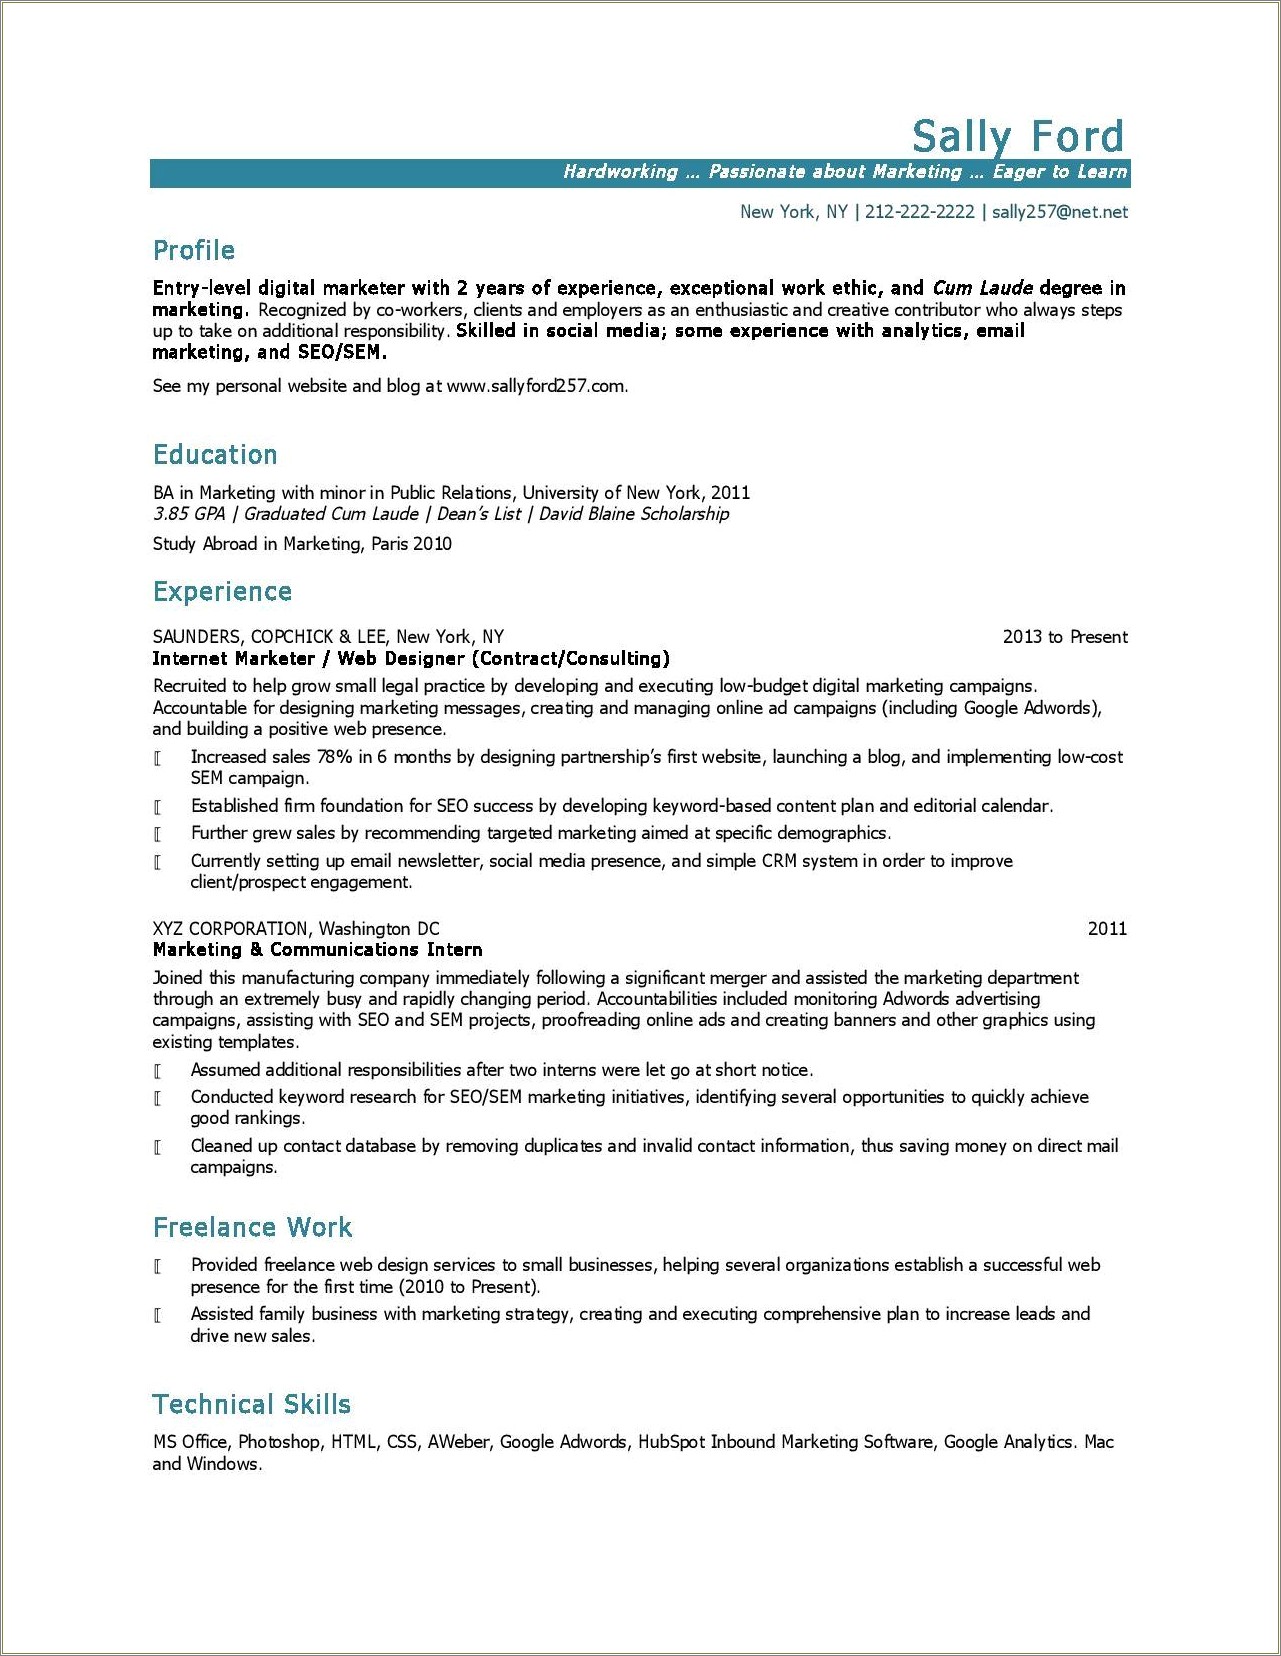 Resume Template For Entry Level Marketing